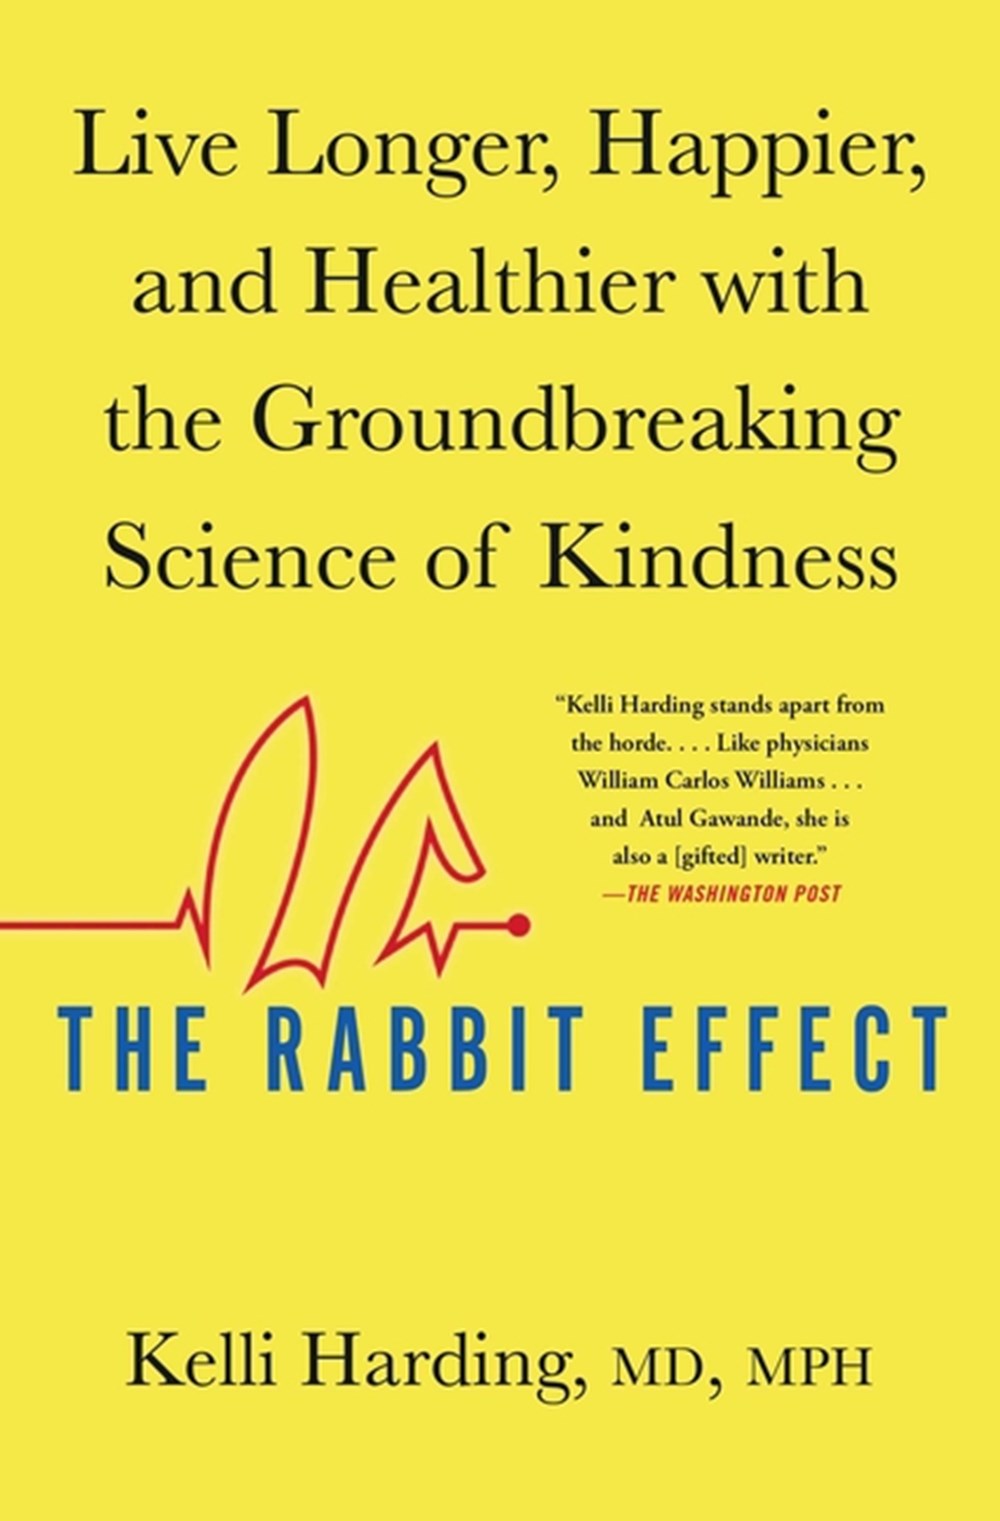 Rabbit Effect Live Longer, Happier, and Healthier with the Groundbreaking Science of Kindness